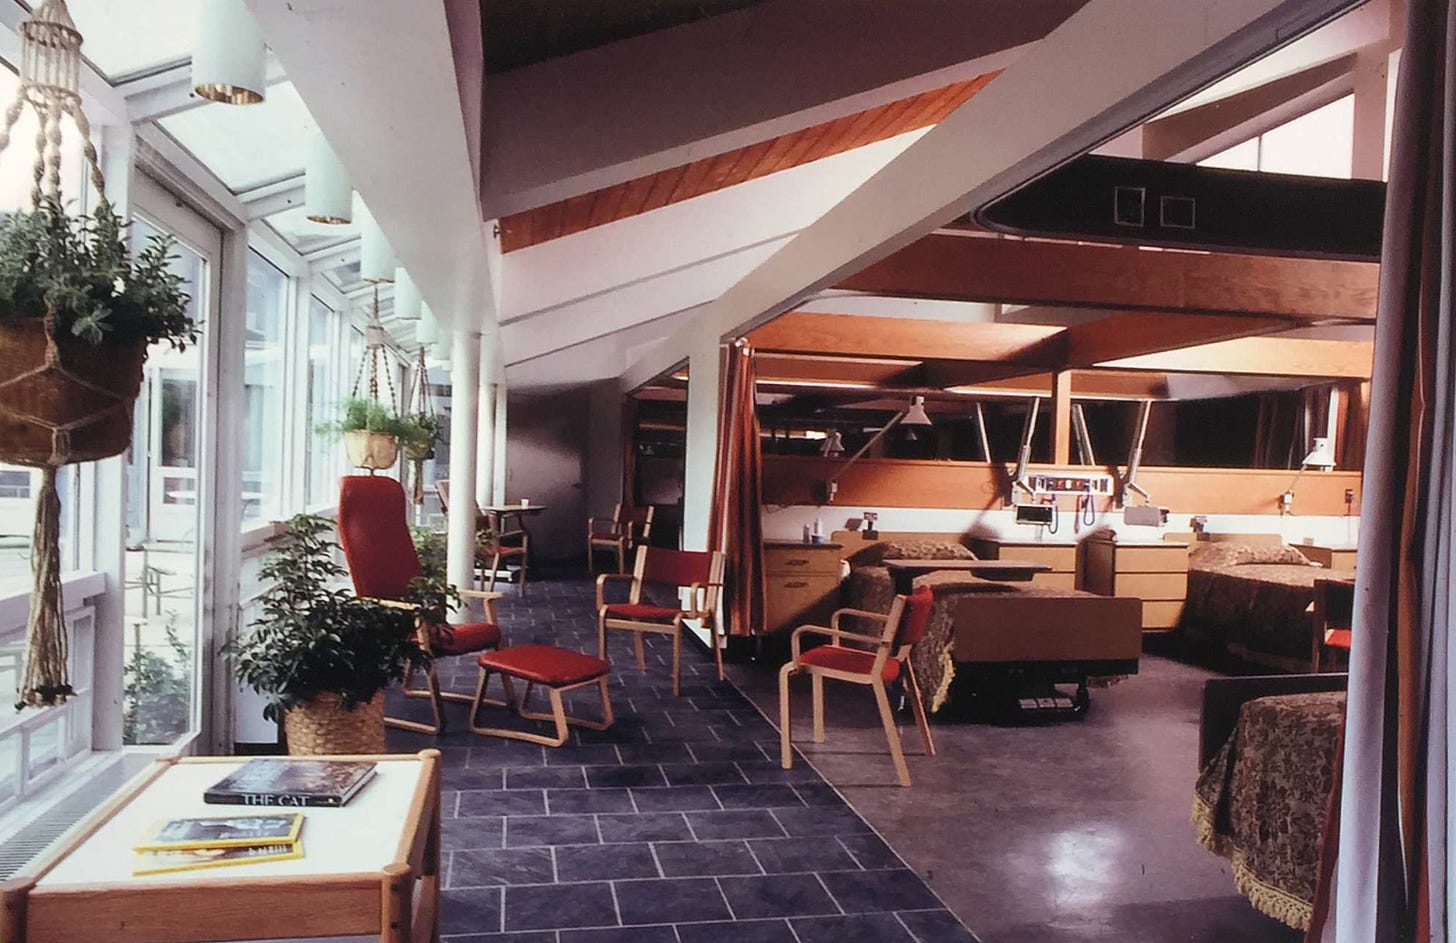 View of a four-patient bedroom from the greenhouse hallway, ca. 1980.